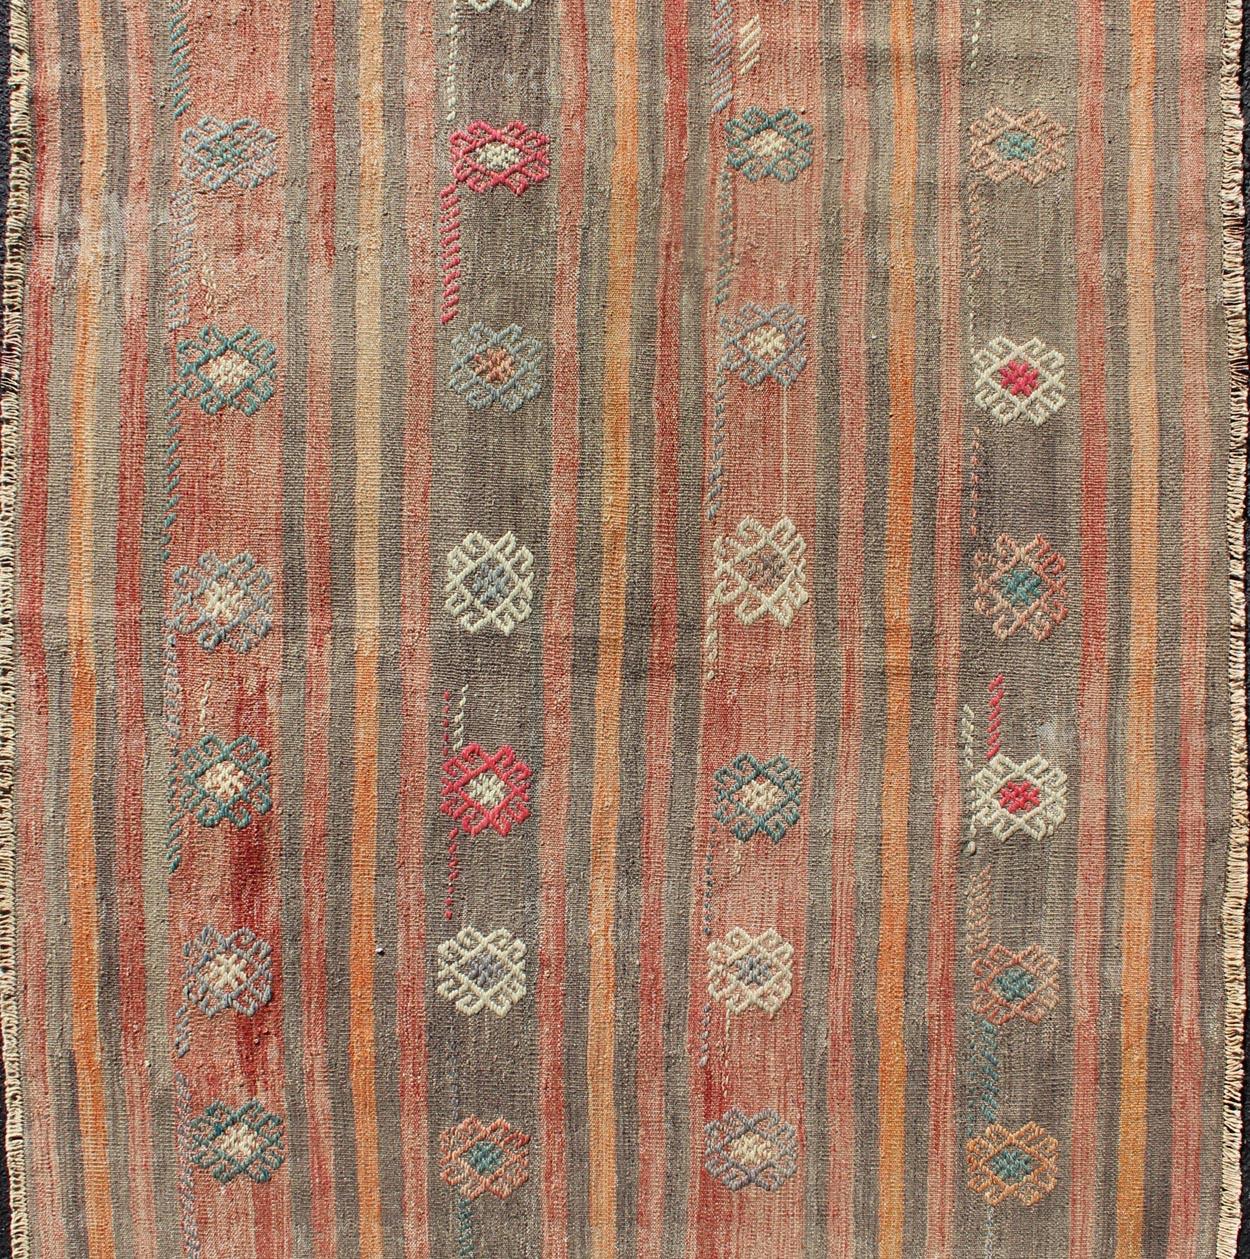 Colorful Vintage Turkish Flat-Weave Kilim Rug with Striped Geometric Design In Good Condition For Sale In Atlanta, GA